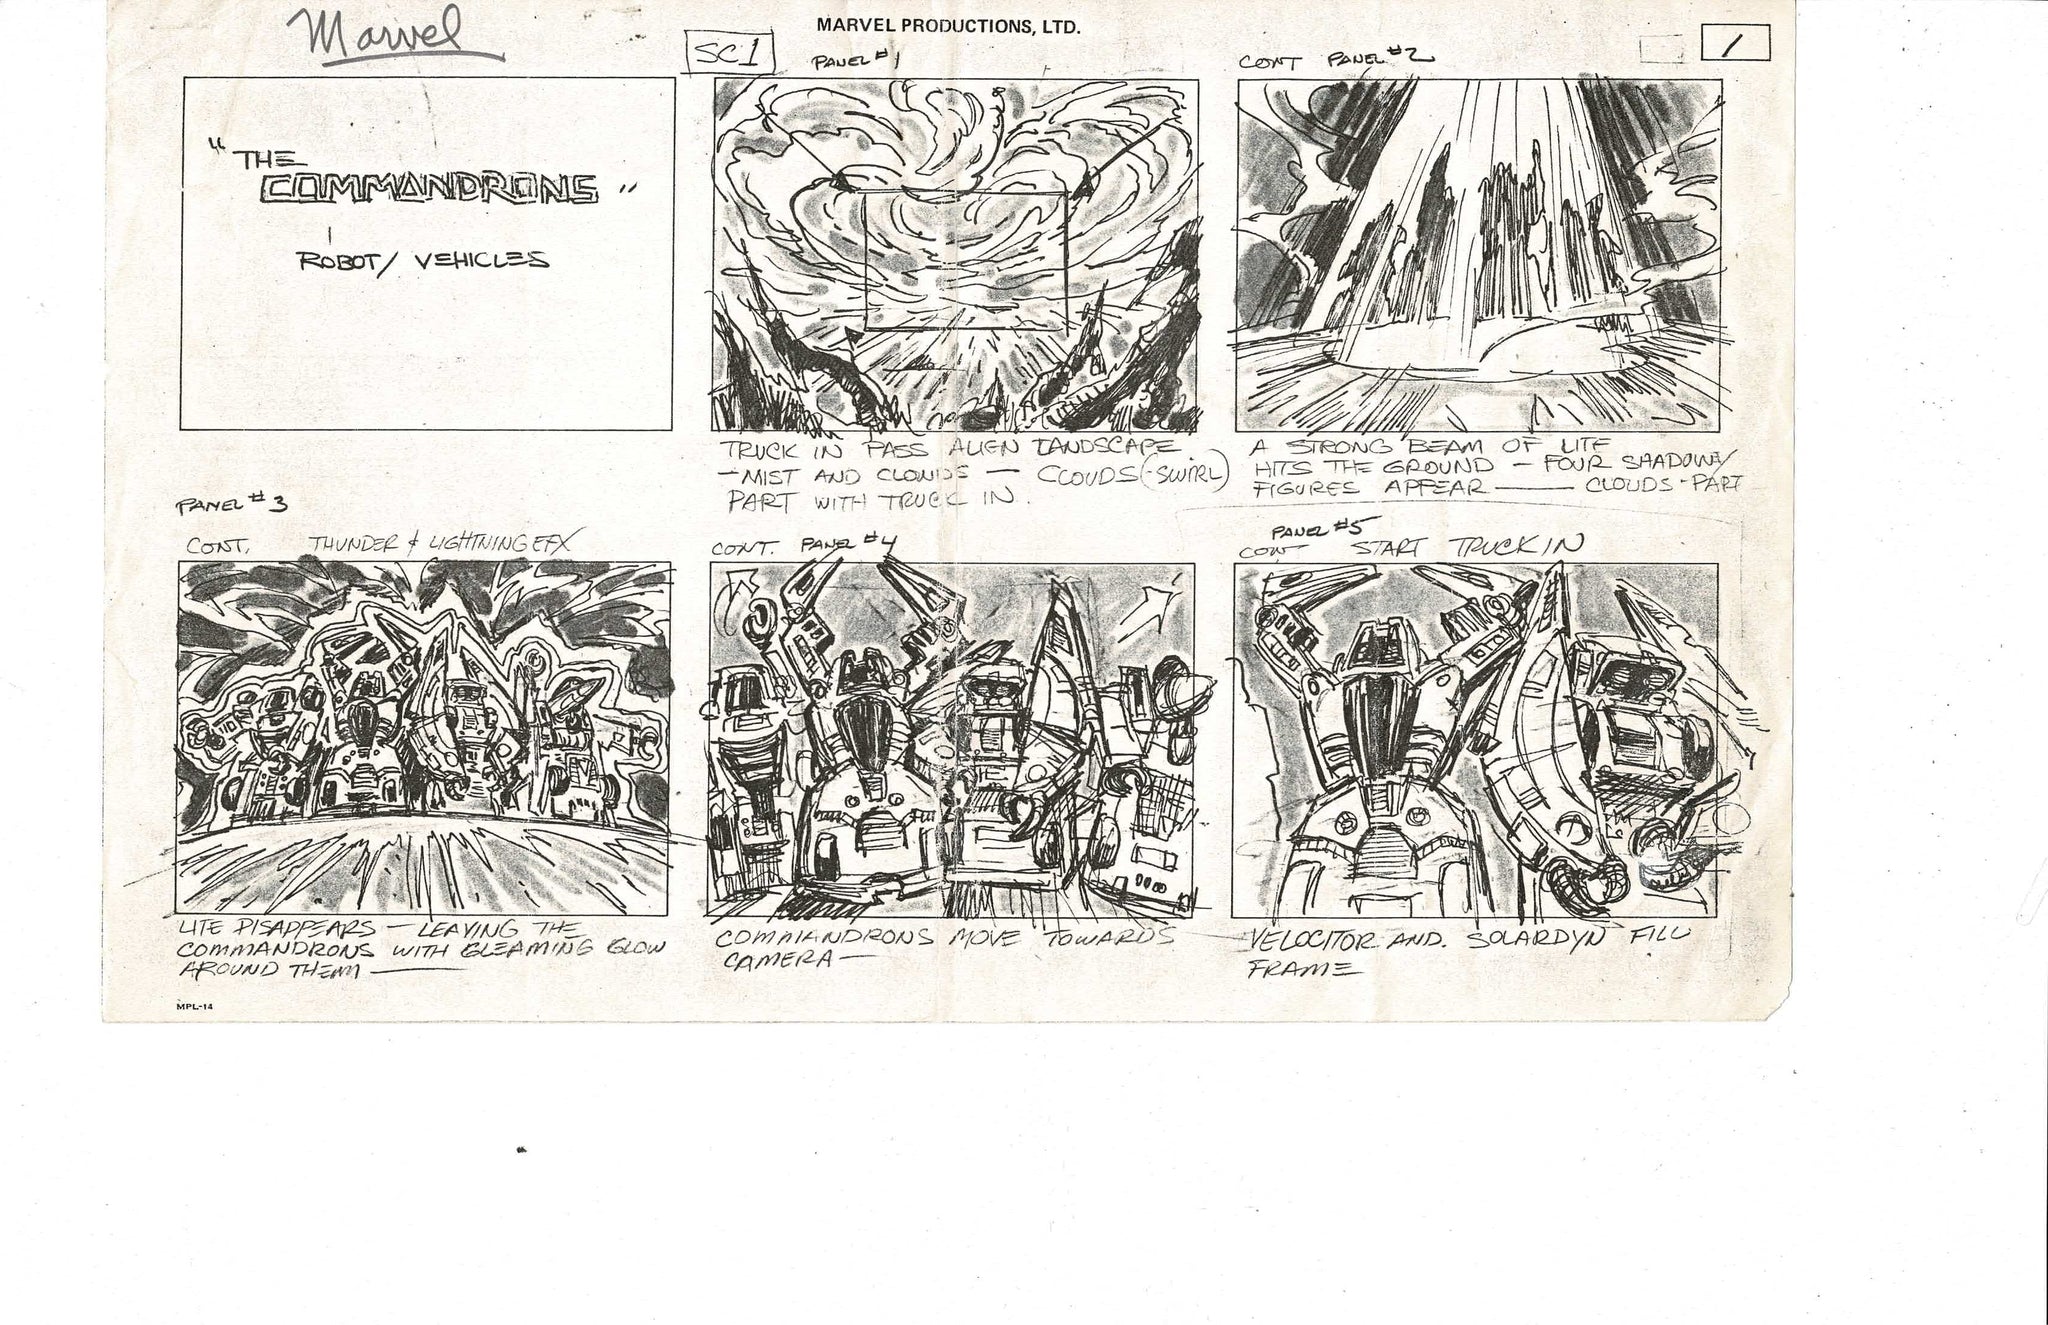 The Commandrons storyboard EX7510 - Animation Legends